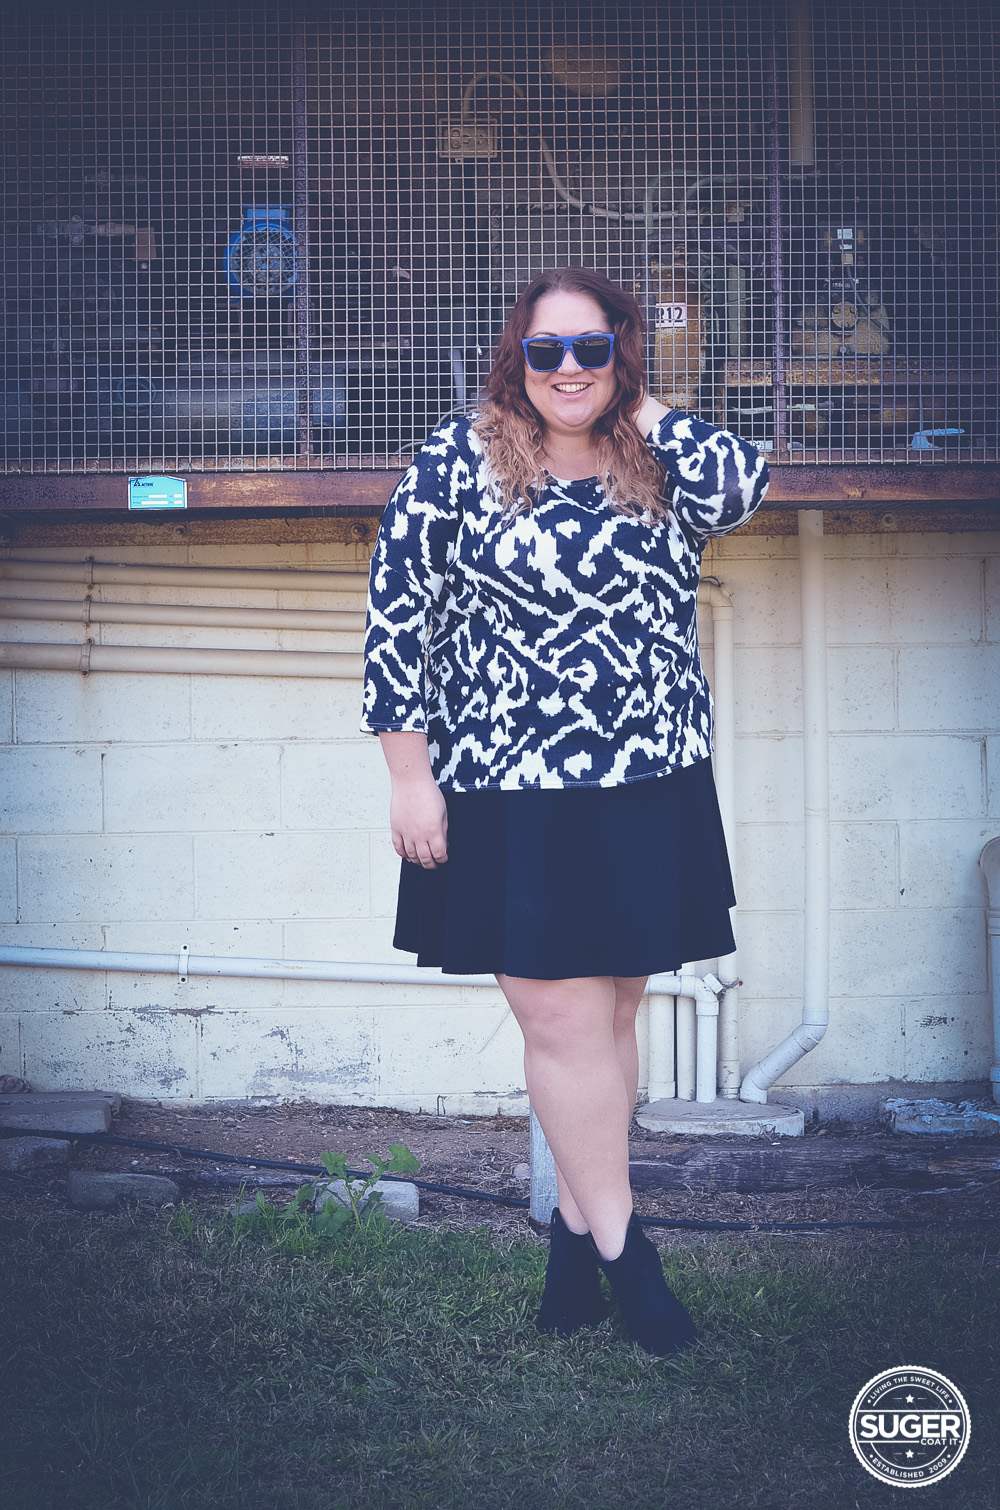 PLUS SIZE STYLE HACKS  WIDE-CALF BOOT HACK (for skinny ankles